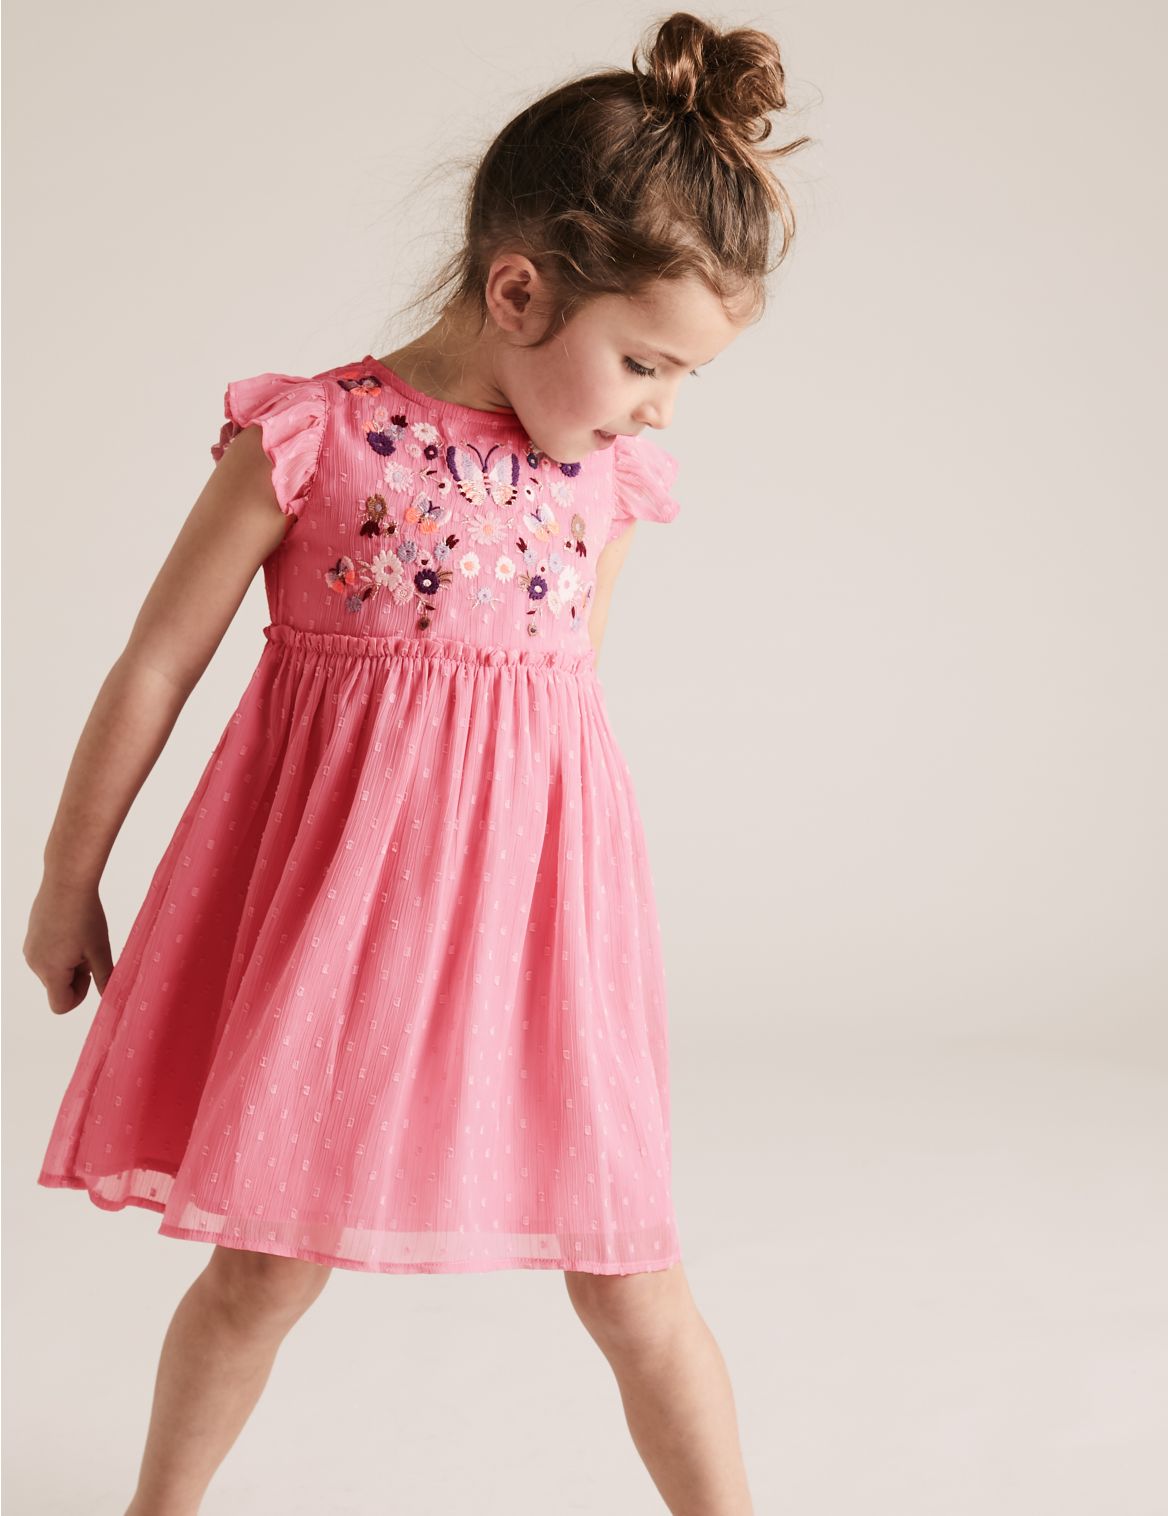 Chiffon Embroidered Floral Dress (2-7 Yrs) pink